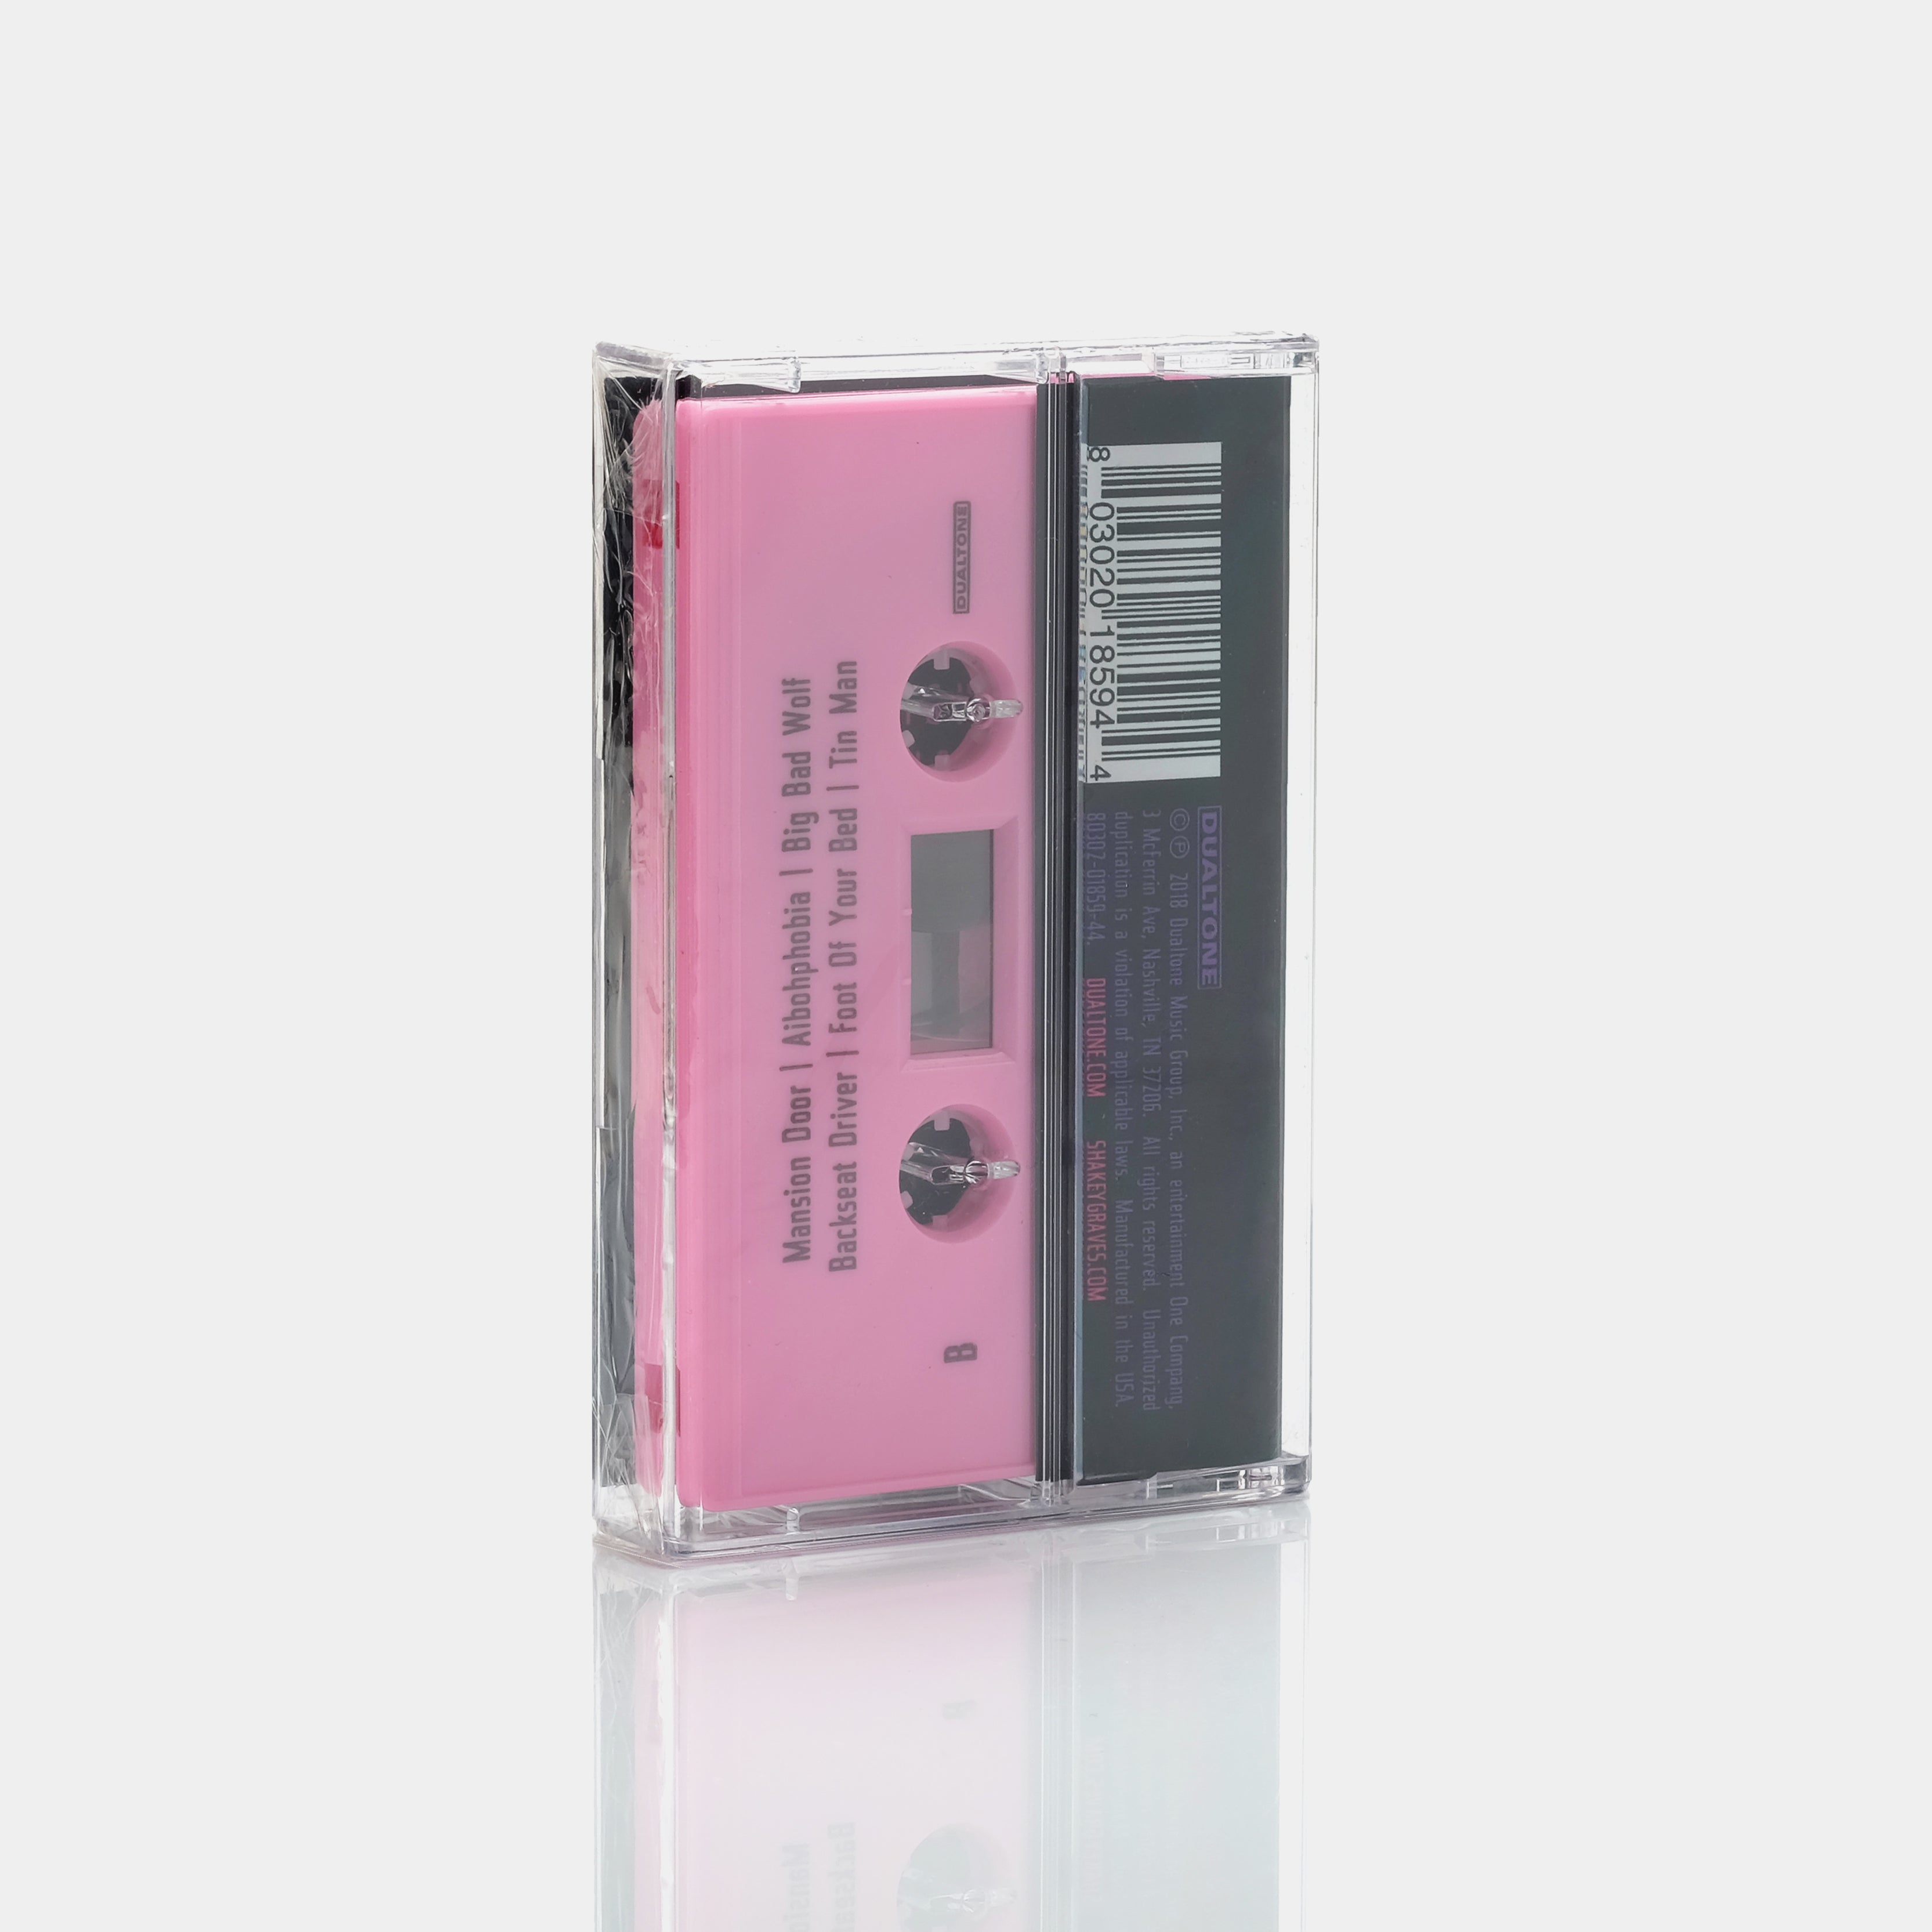 Shakey Graves - Can't Wake Up Cassette Tape